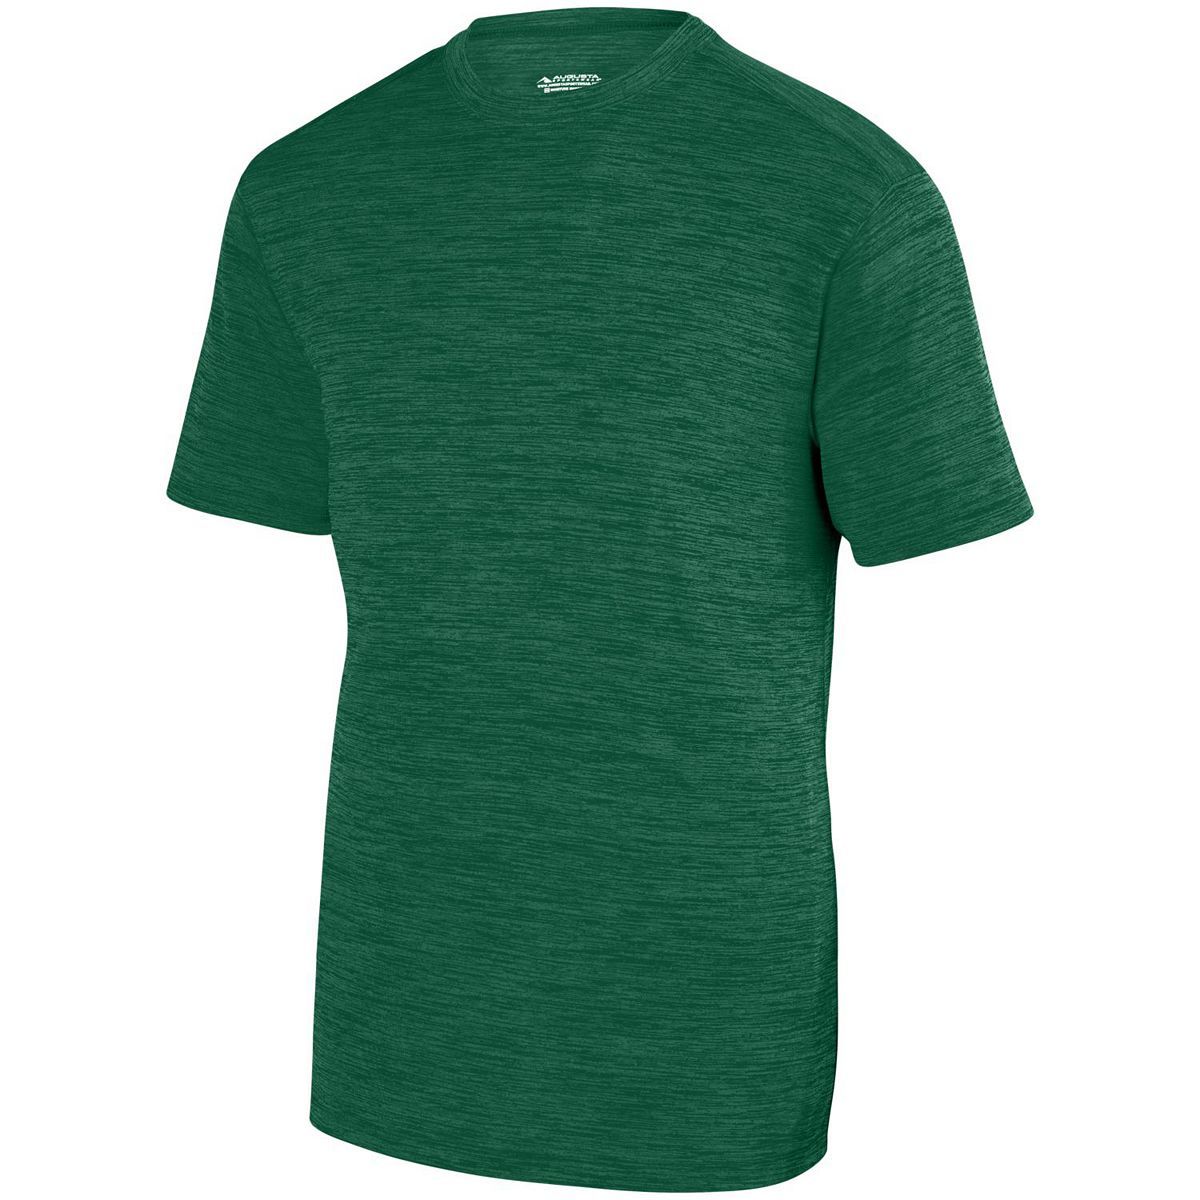 Augusta Sportswear Shadow Tonal Heather Training Tee in Dark Green  -Part of the Adult, Adult-Tee-Shirt, T-Shirts, Augusta-Products, Shirts, Tonal-Fleece-Collection product lines at KanaleyCreations.com